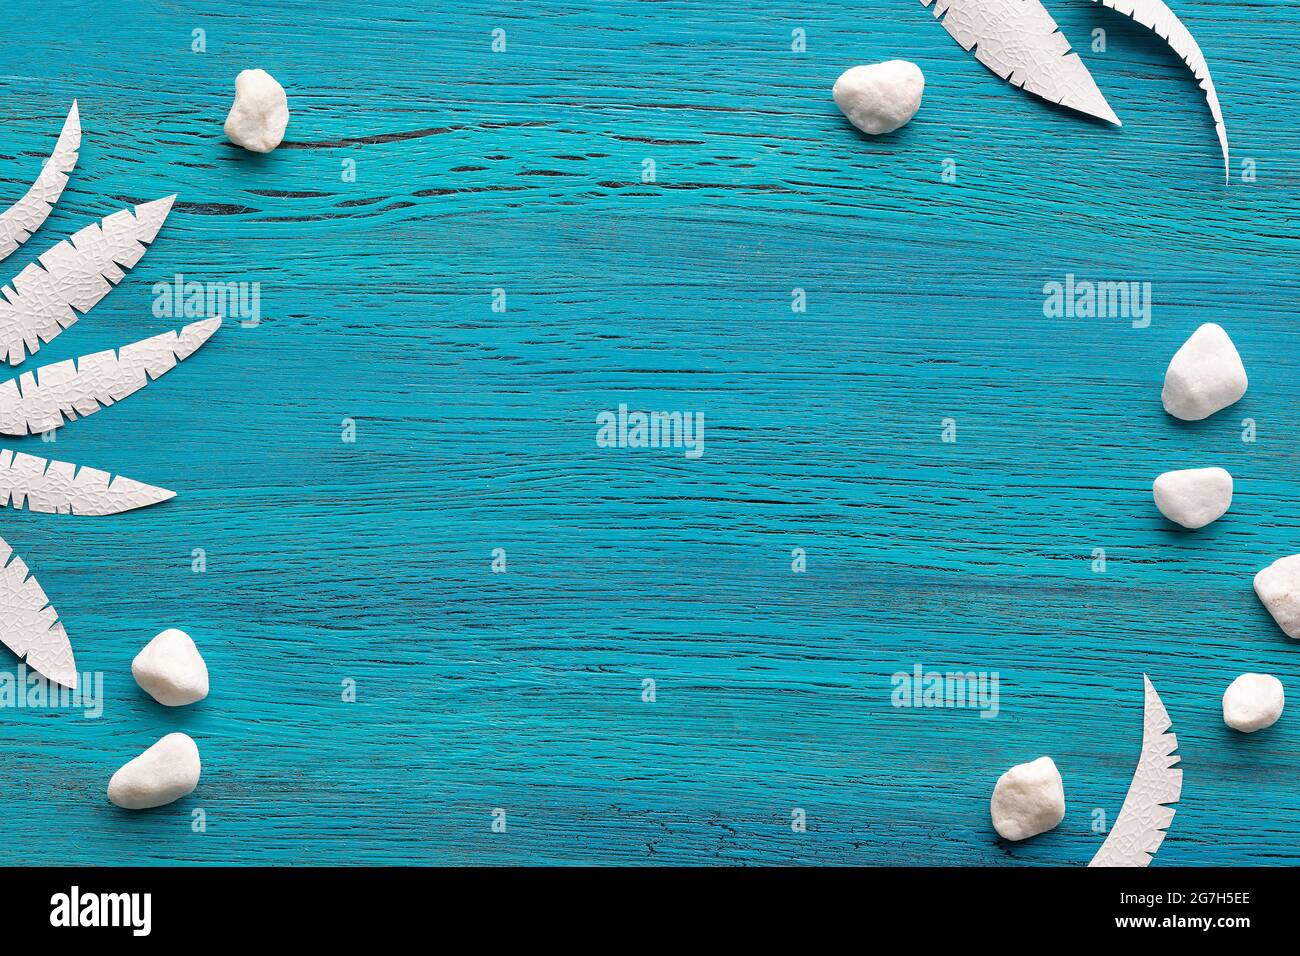 Abstract grungy blue wooden background with exotic paper leaves made of paper and white stones. Copy-space, place for text. Flat lay, top view. Stock Photo